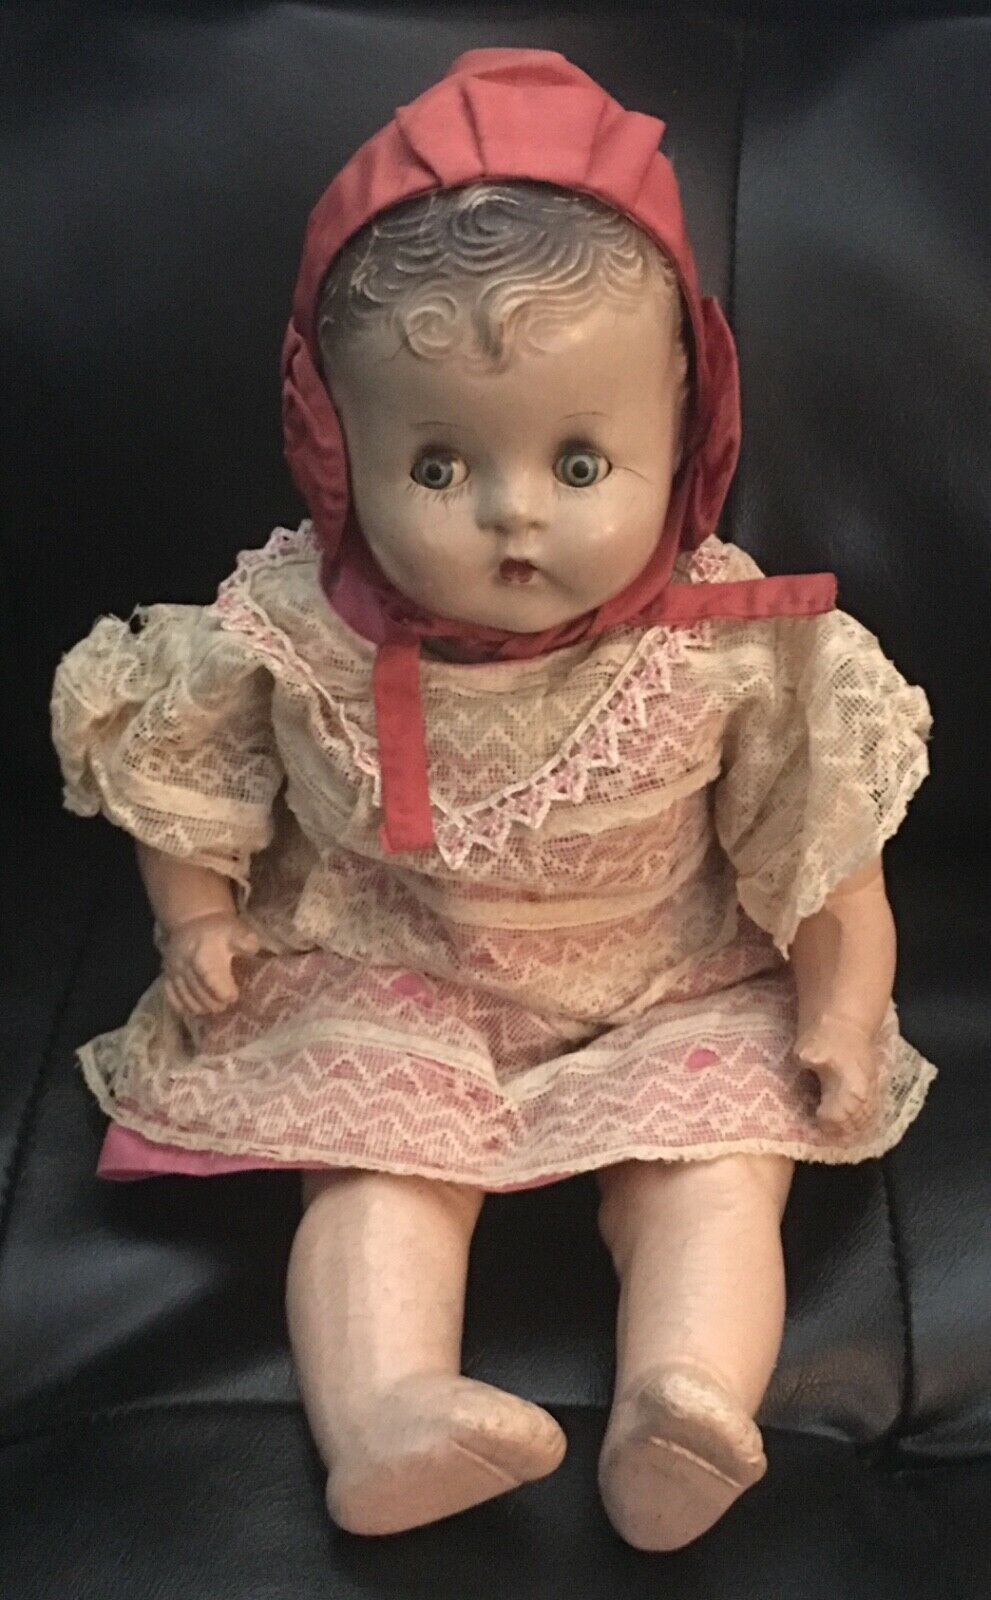 Antique Baby Doll Mama Crier 16” Composition Baby Doll Clothing Circa 1930’s